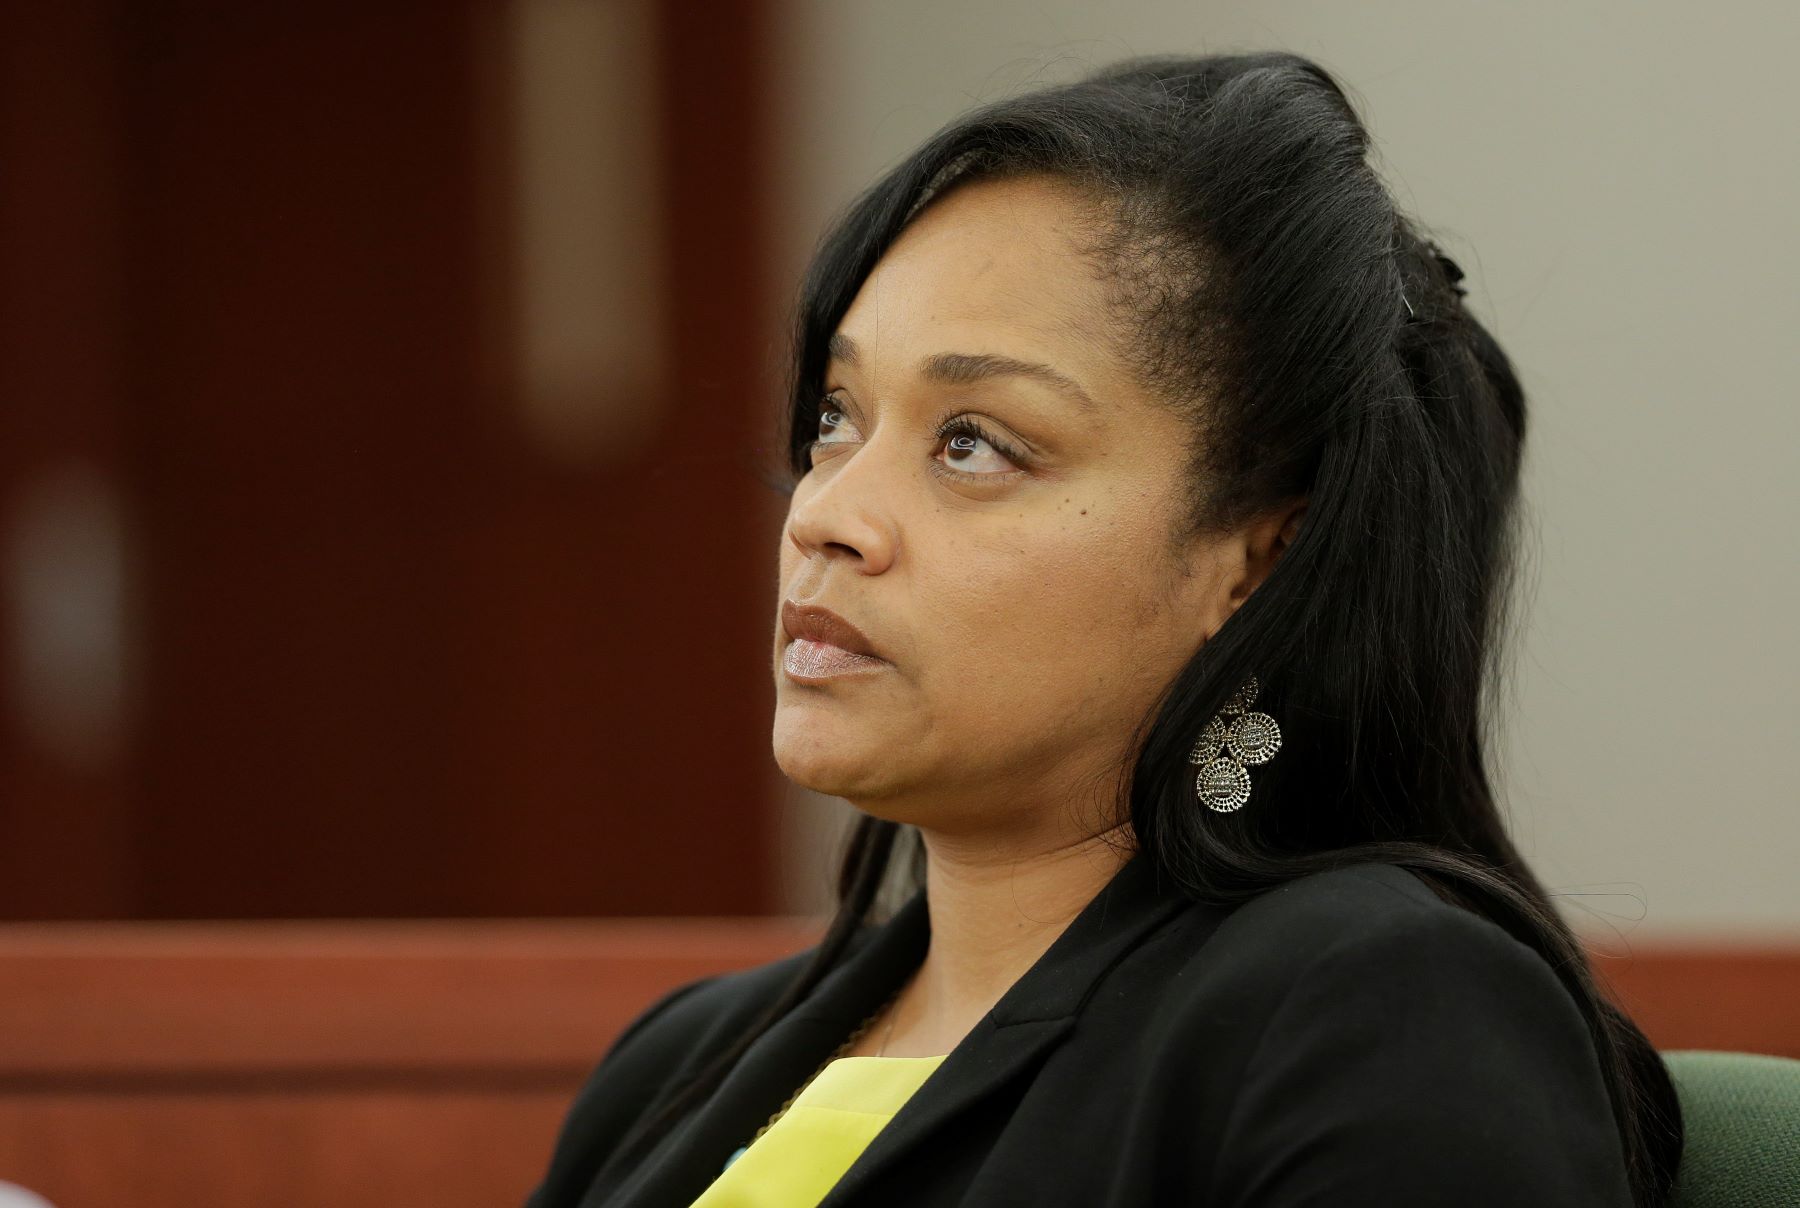 Arnelle Simpson, daughter of O.J. Simpson, at Clark County District Court in Las Vegas, Nevada